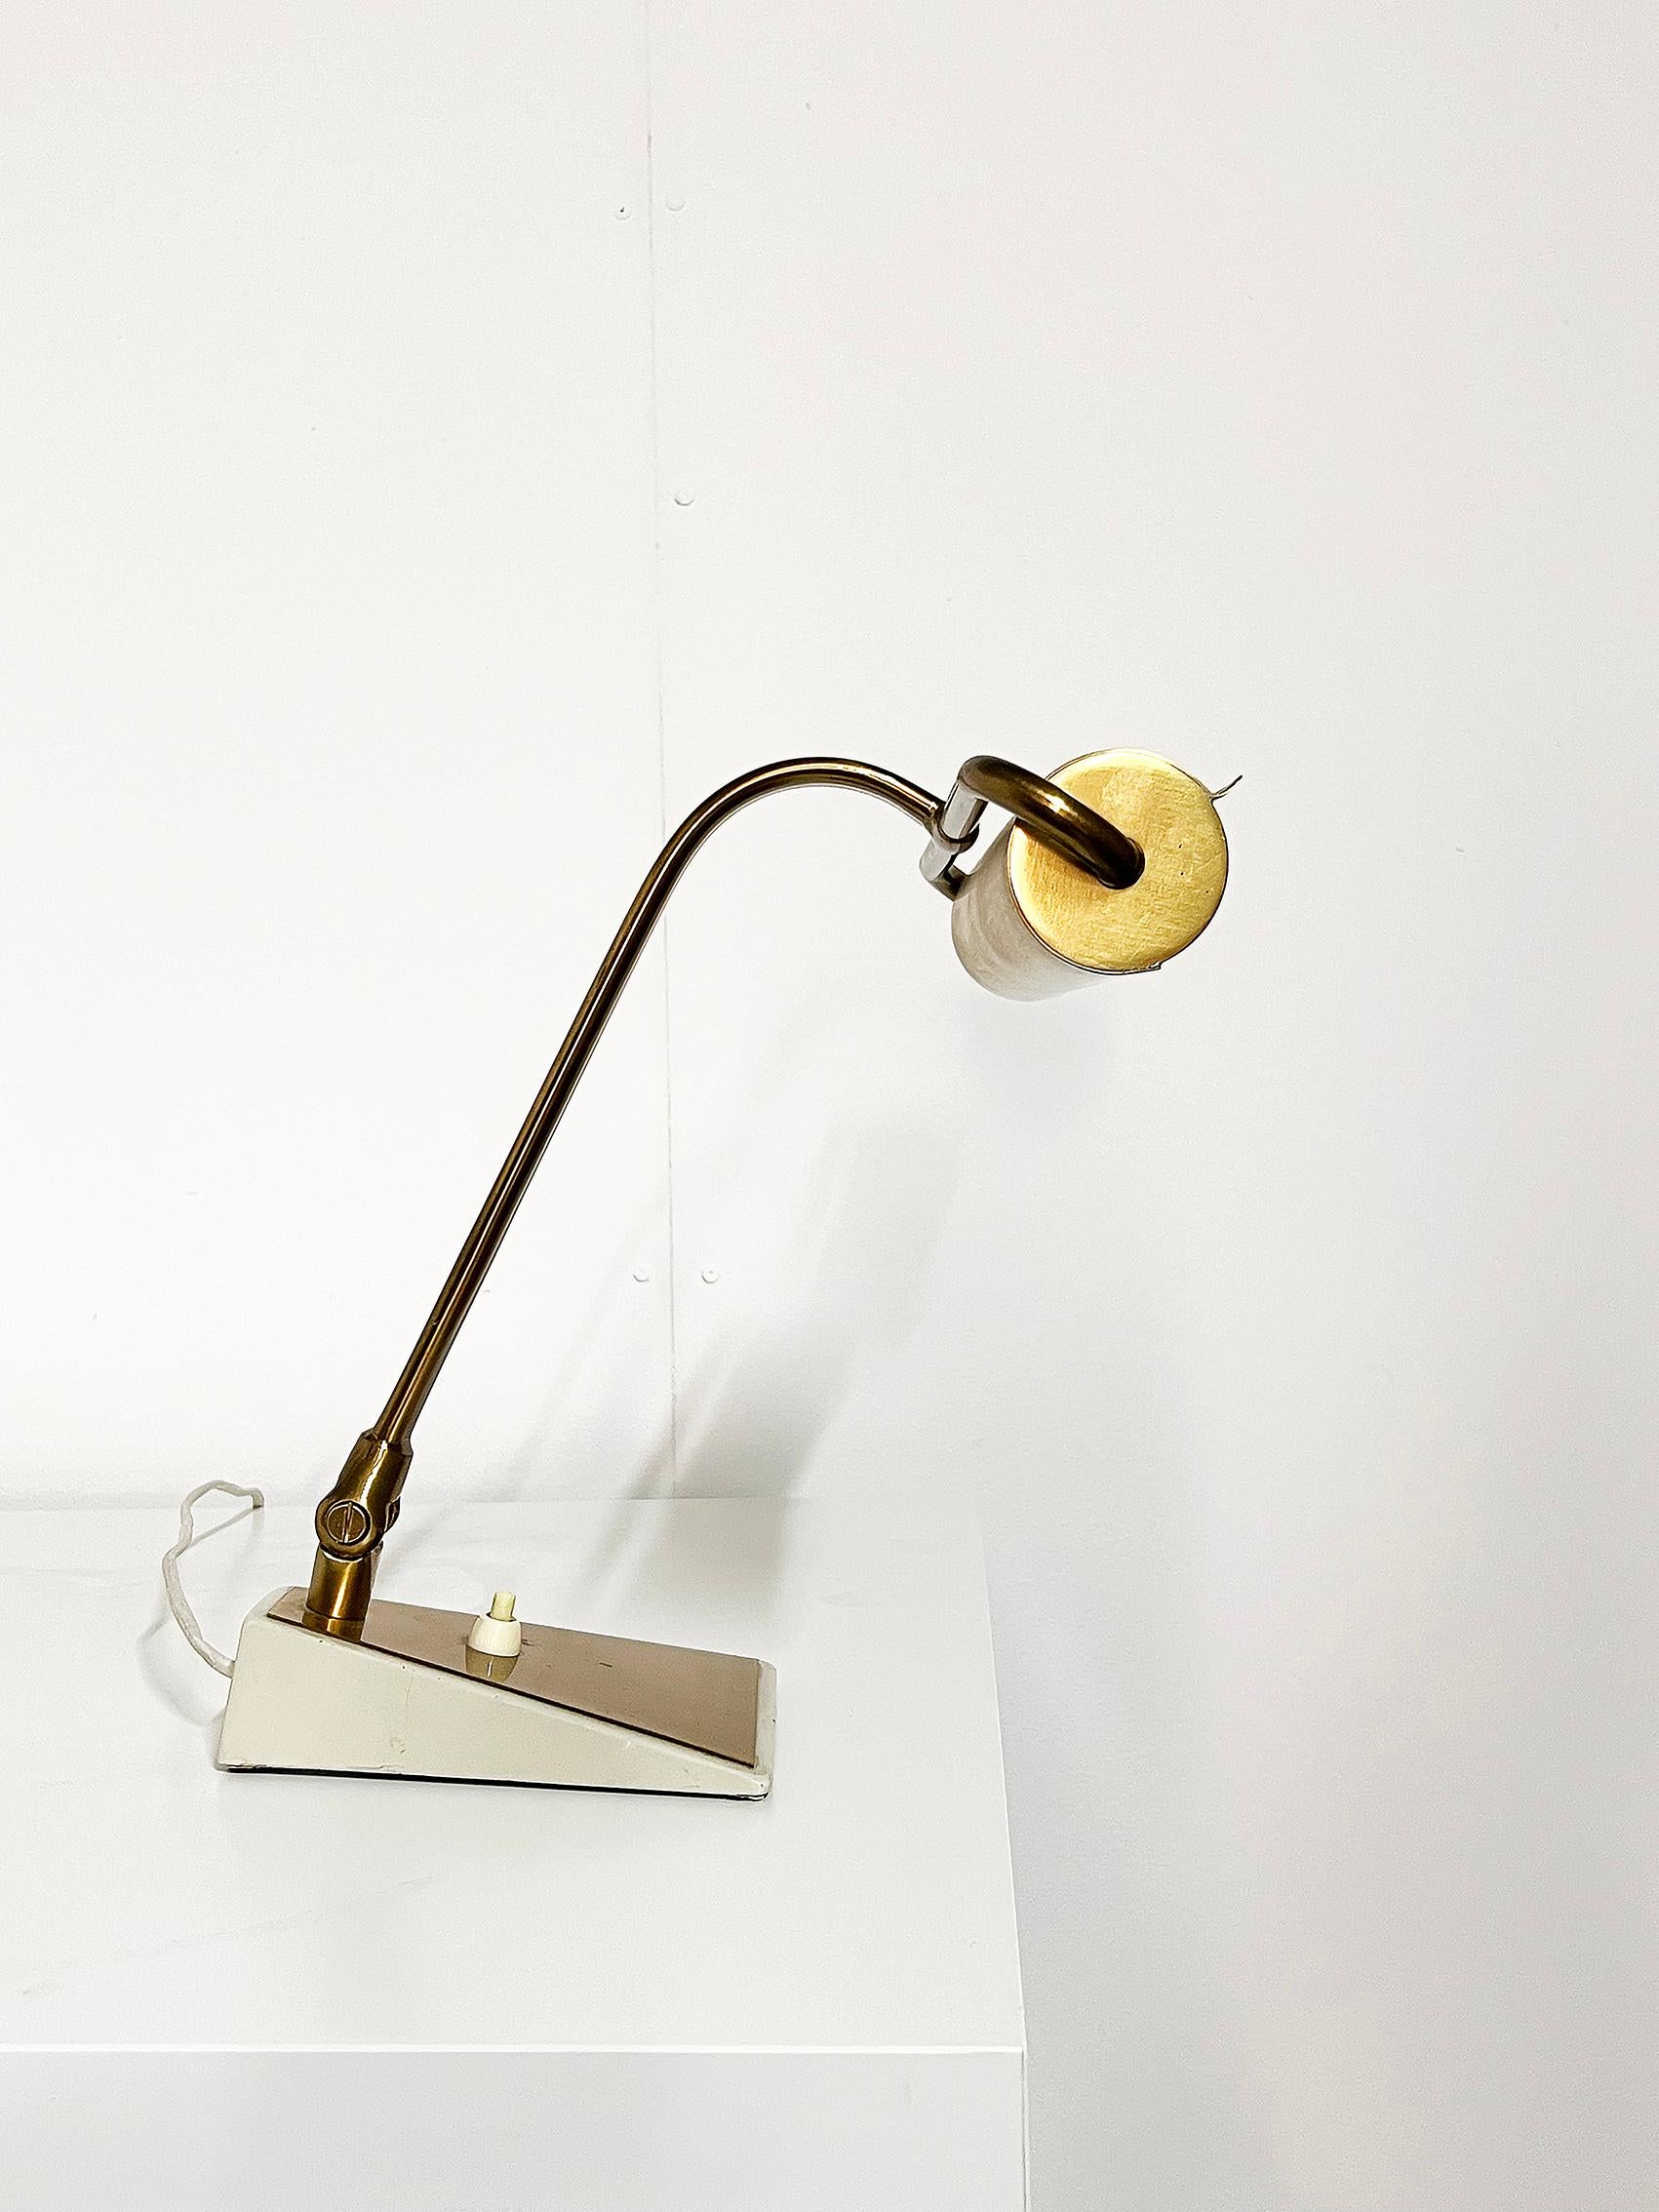 Scandinavian Modern Table Lamp in Brass by Boréns ca 1950-1960's For Sale 1